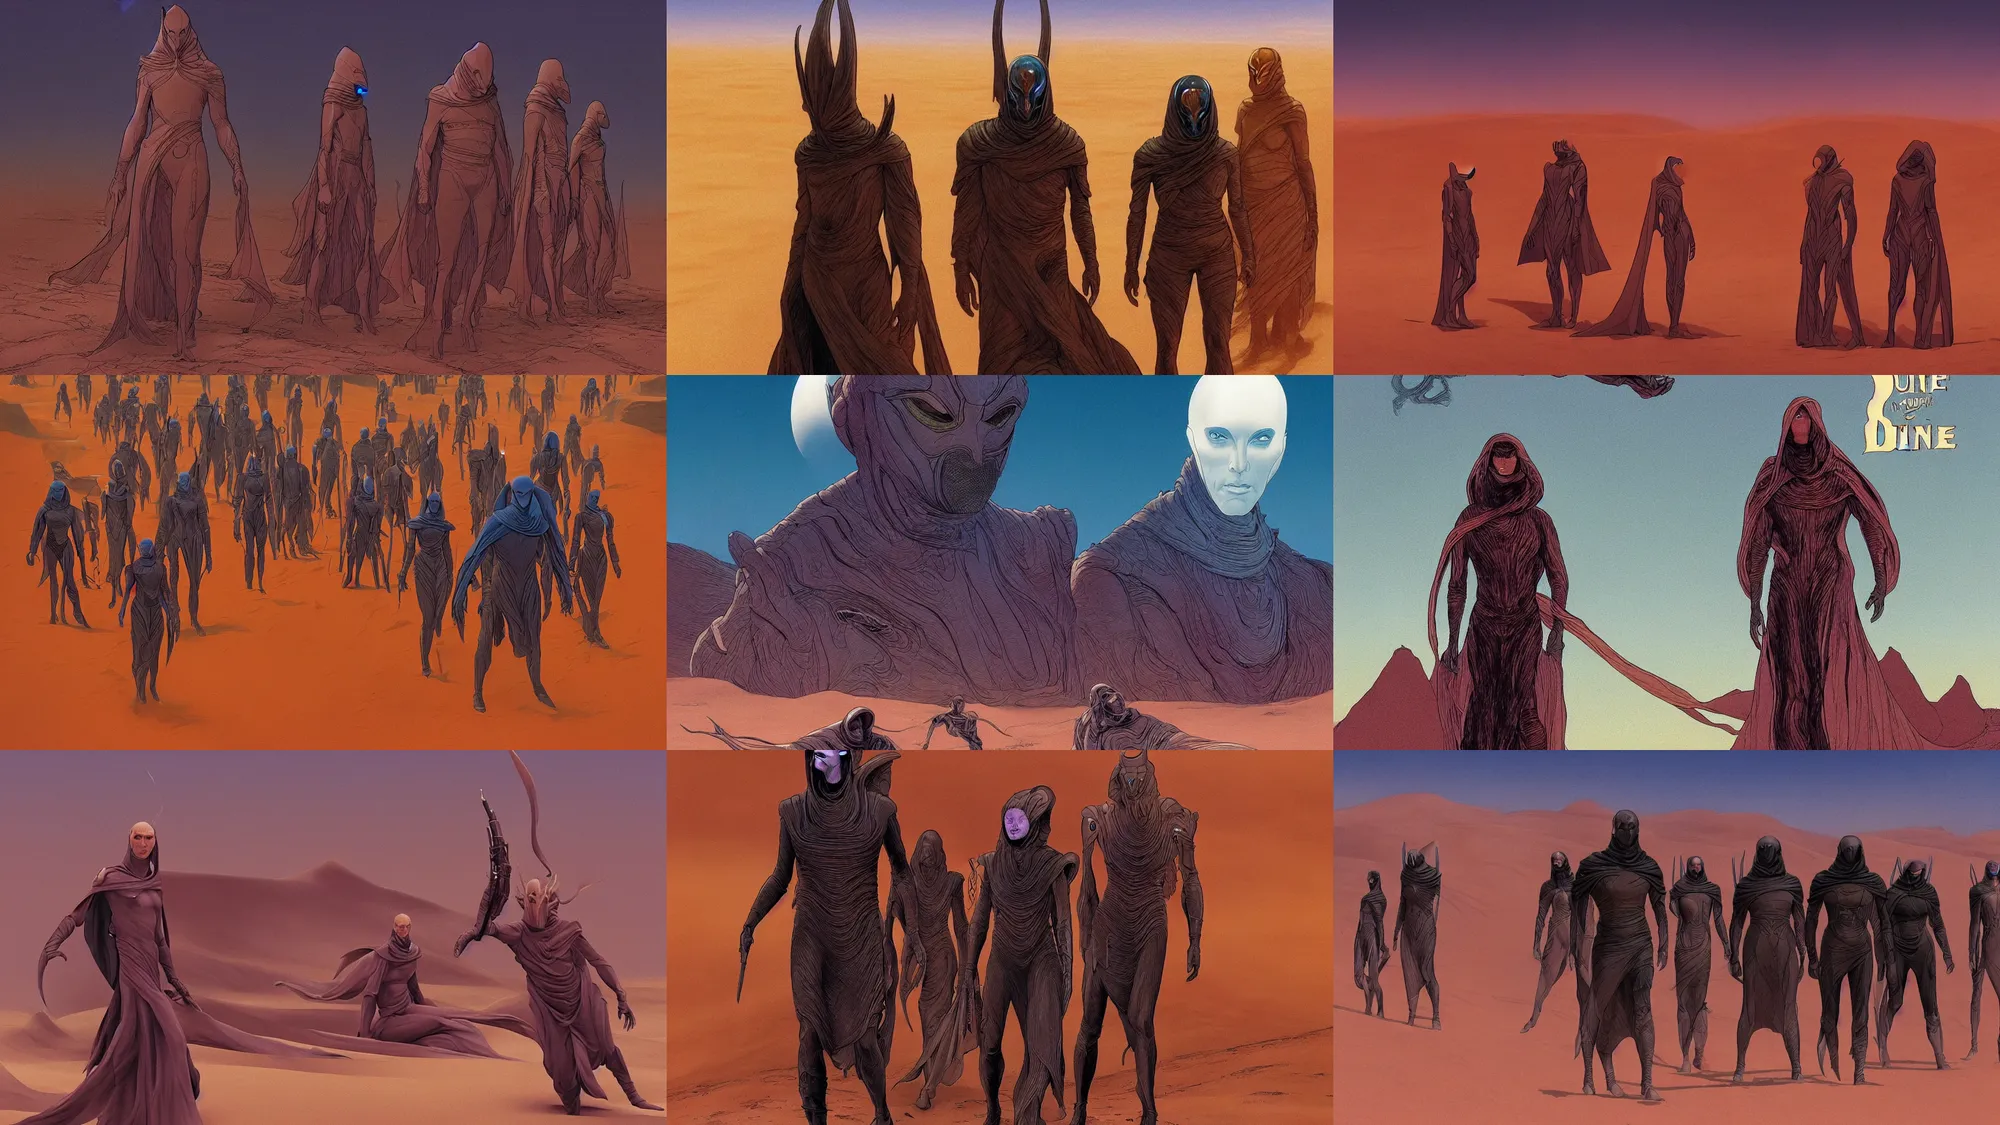 Prompt: dune by Denis Villeneuve but the Fremen are redesigned to be imaginative inhuman creative aliens by moebius, Jean Giraud, cinematic, 4k